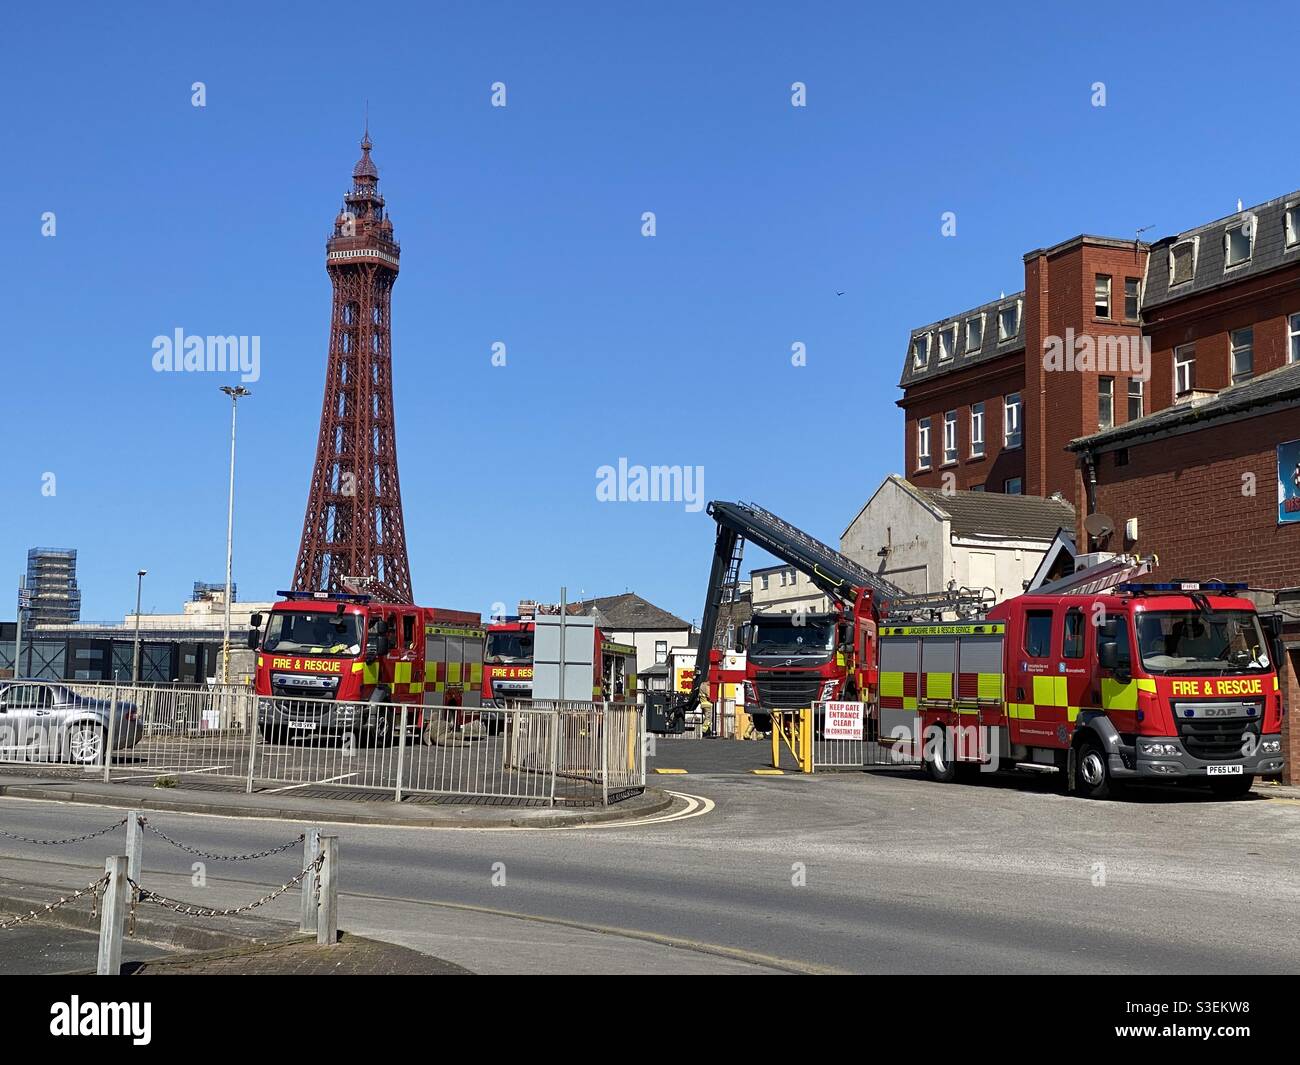 Fire engines training at Blackpool Stock Photo